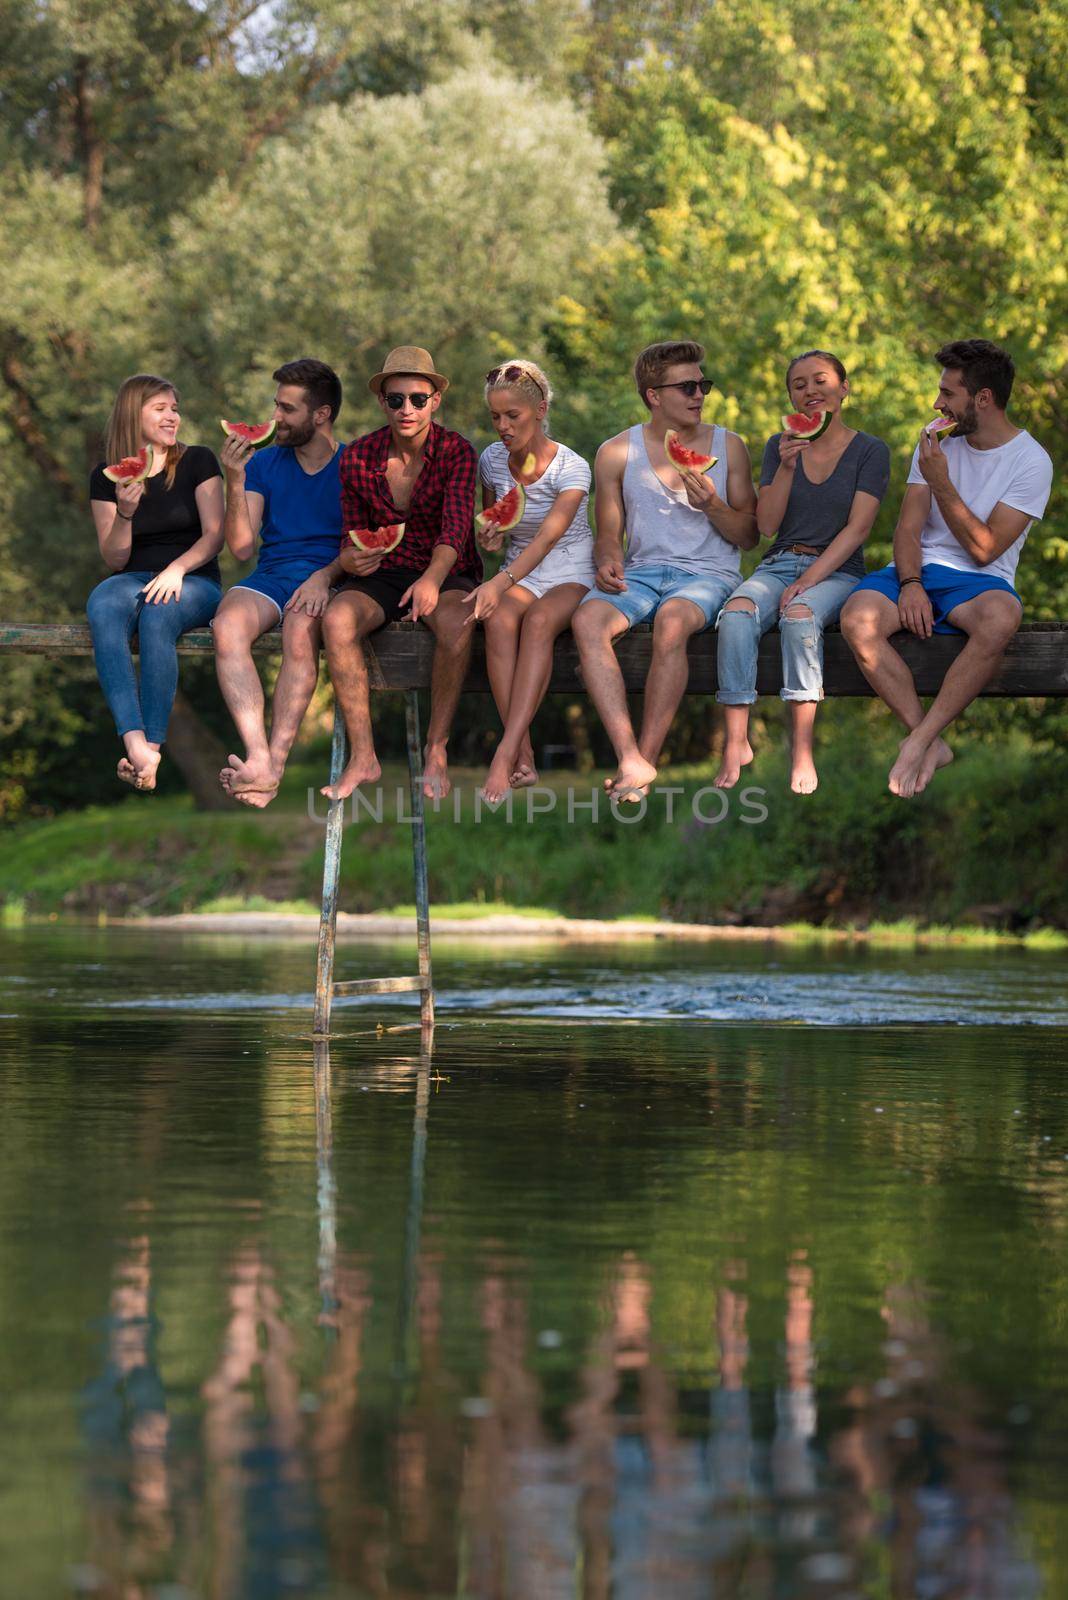 group of young friends enjoying watermelon while sitting on the wooden bridge over the river in beautiful nature